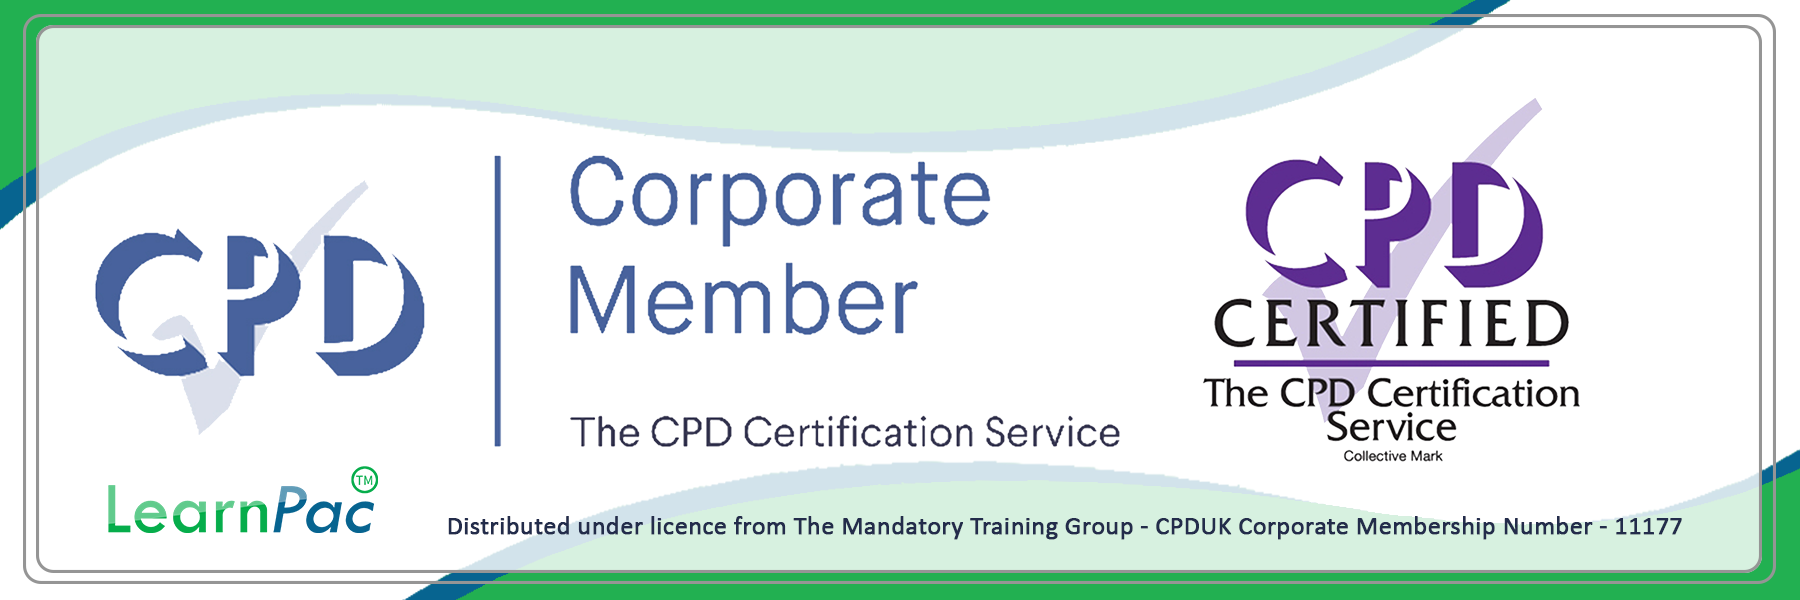 Health and Social Care Train the Trainer - E-Learning Courses with Certificates - CPD Certified - LearnPac Systems UK -